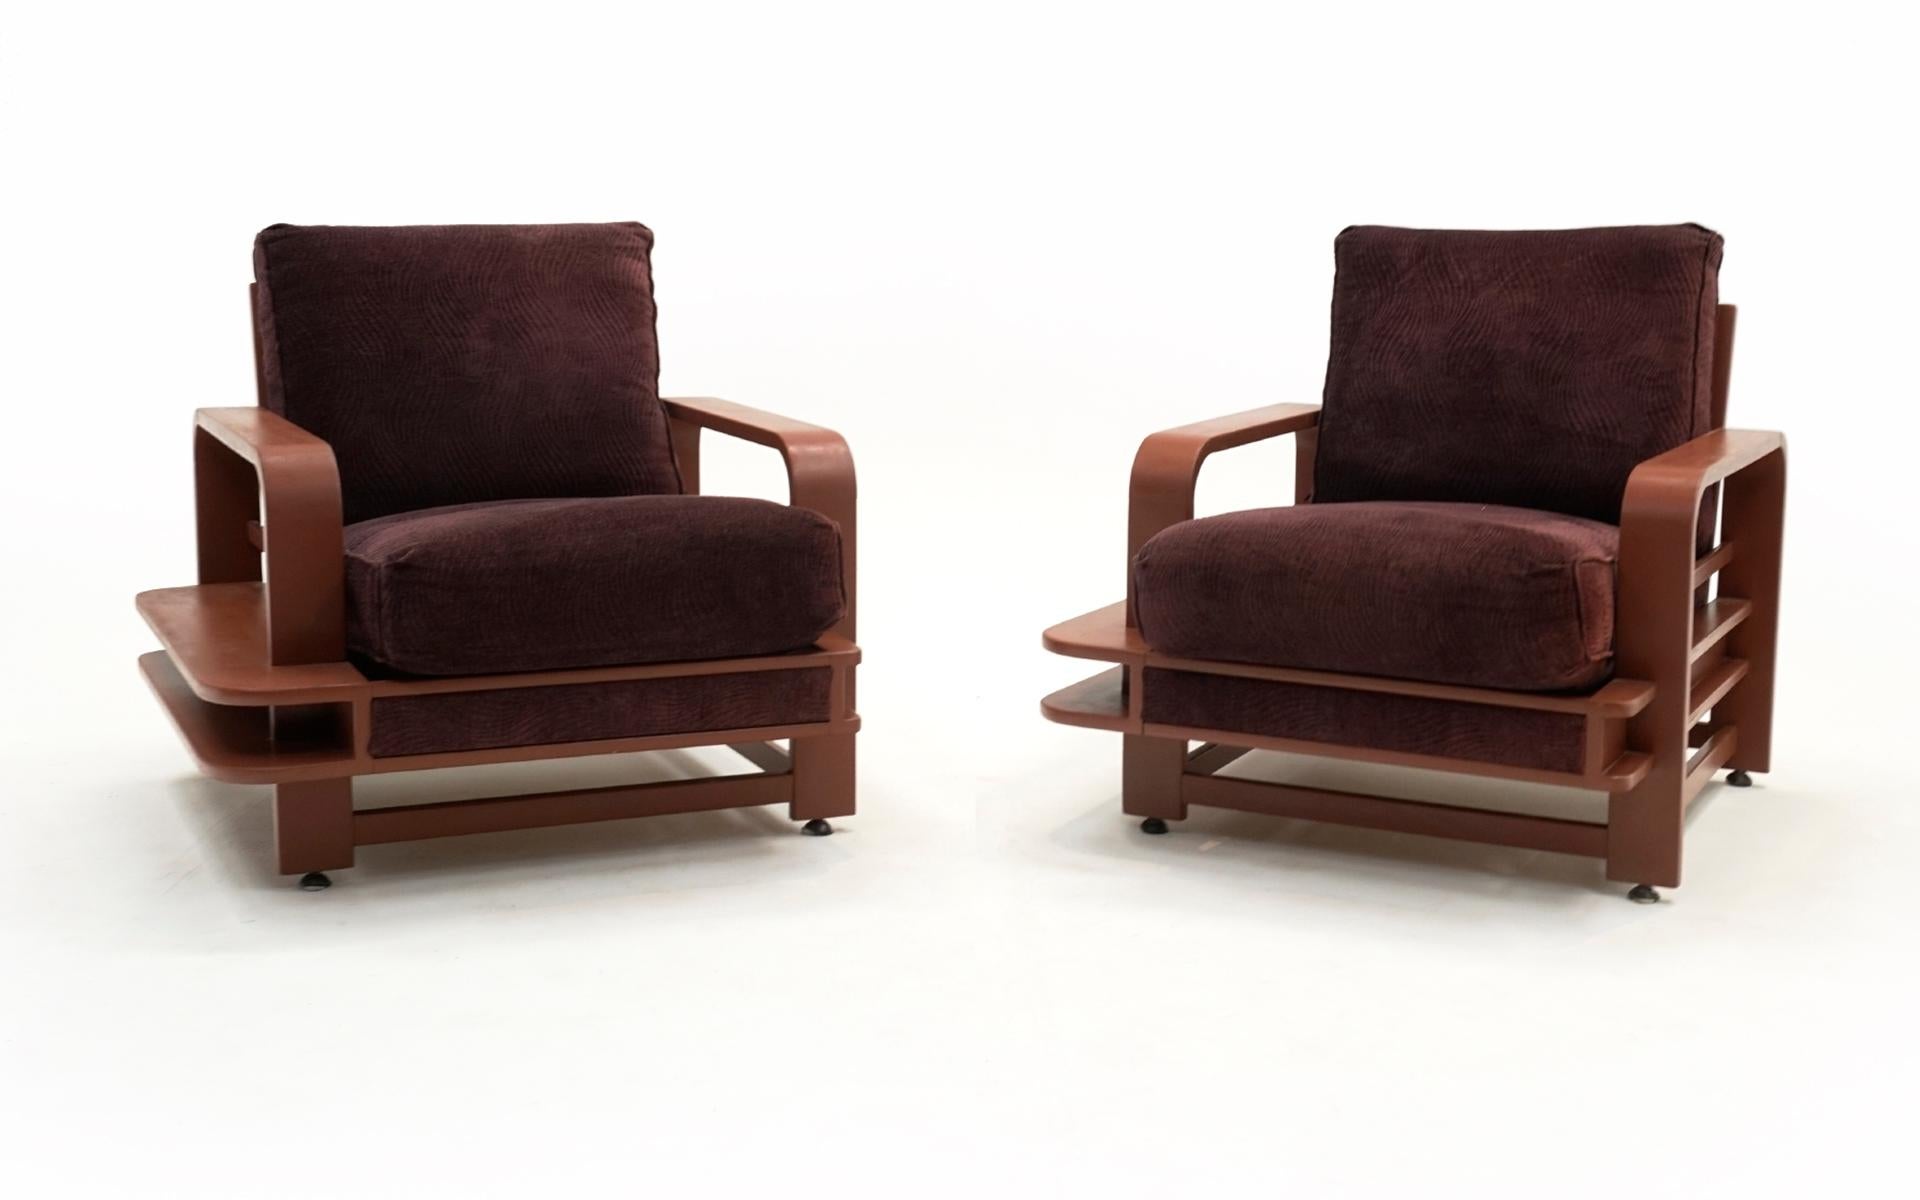 Rarely seen set of two Russel Wright (Russell Wright) large lounge chairs with wood shelf / bookshelf frames. Reupholstered in recent years. Very comfortable.